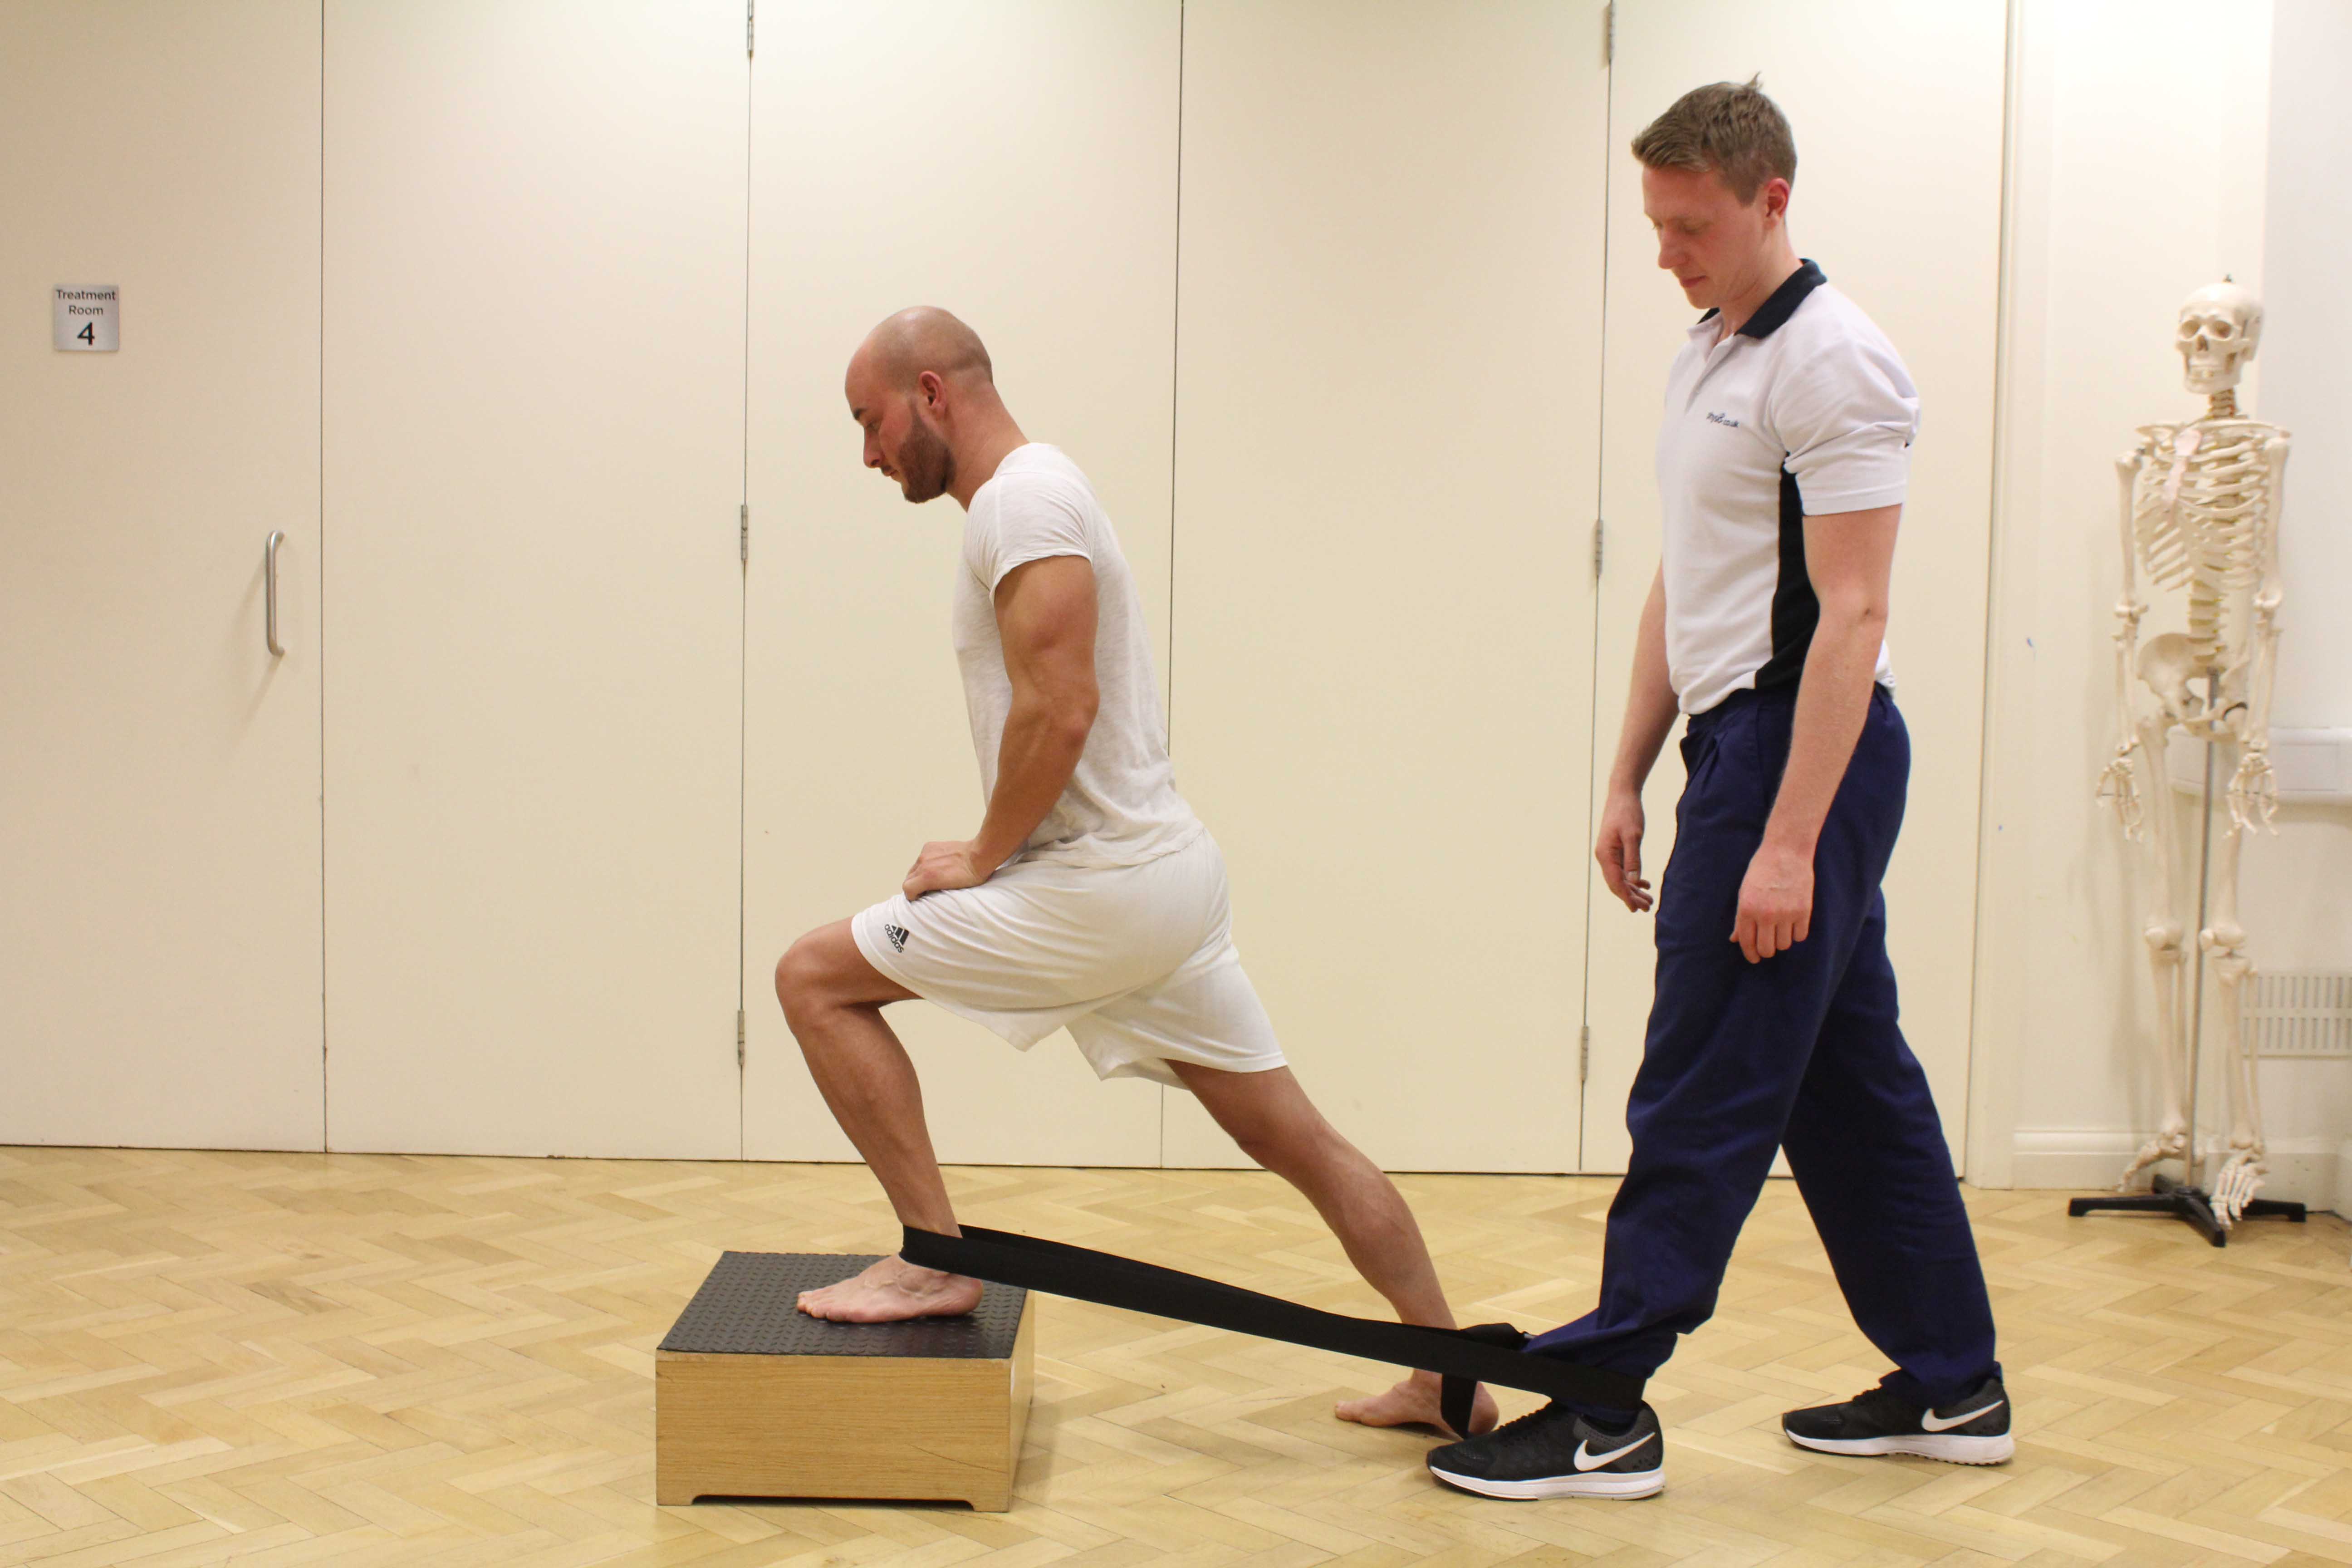 Mobilisation of the ankle joint using a strap and assistance of a MSK physiotherapist